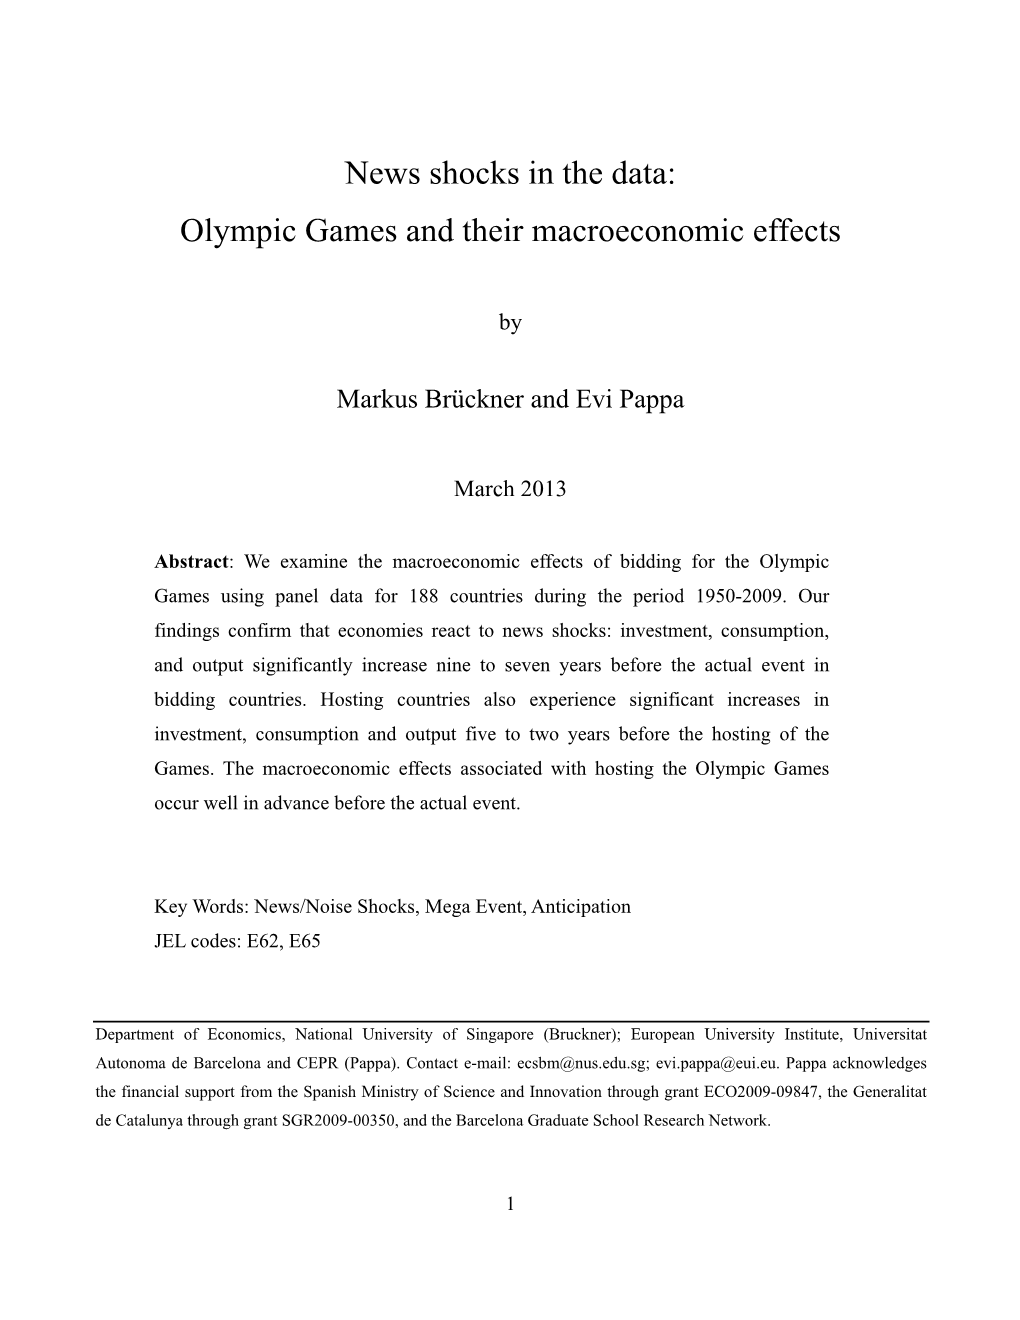 News Shocks in the Data: Olympic Games and Their Macroeconomic Effects